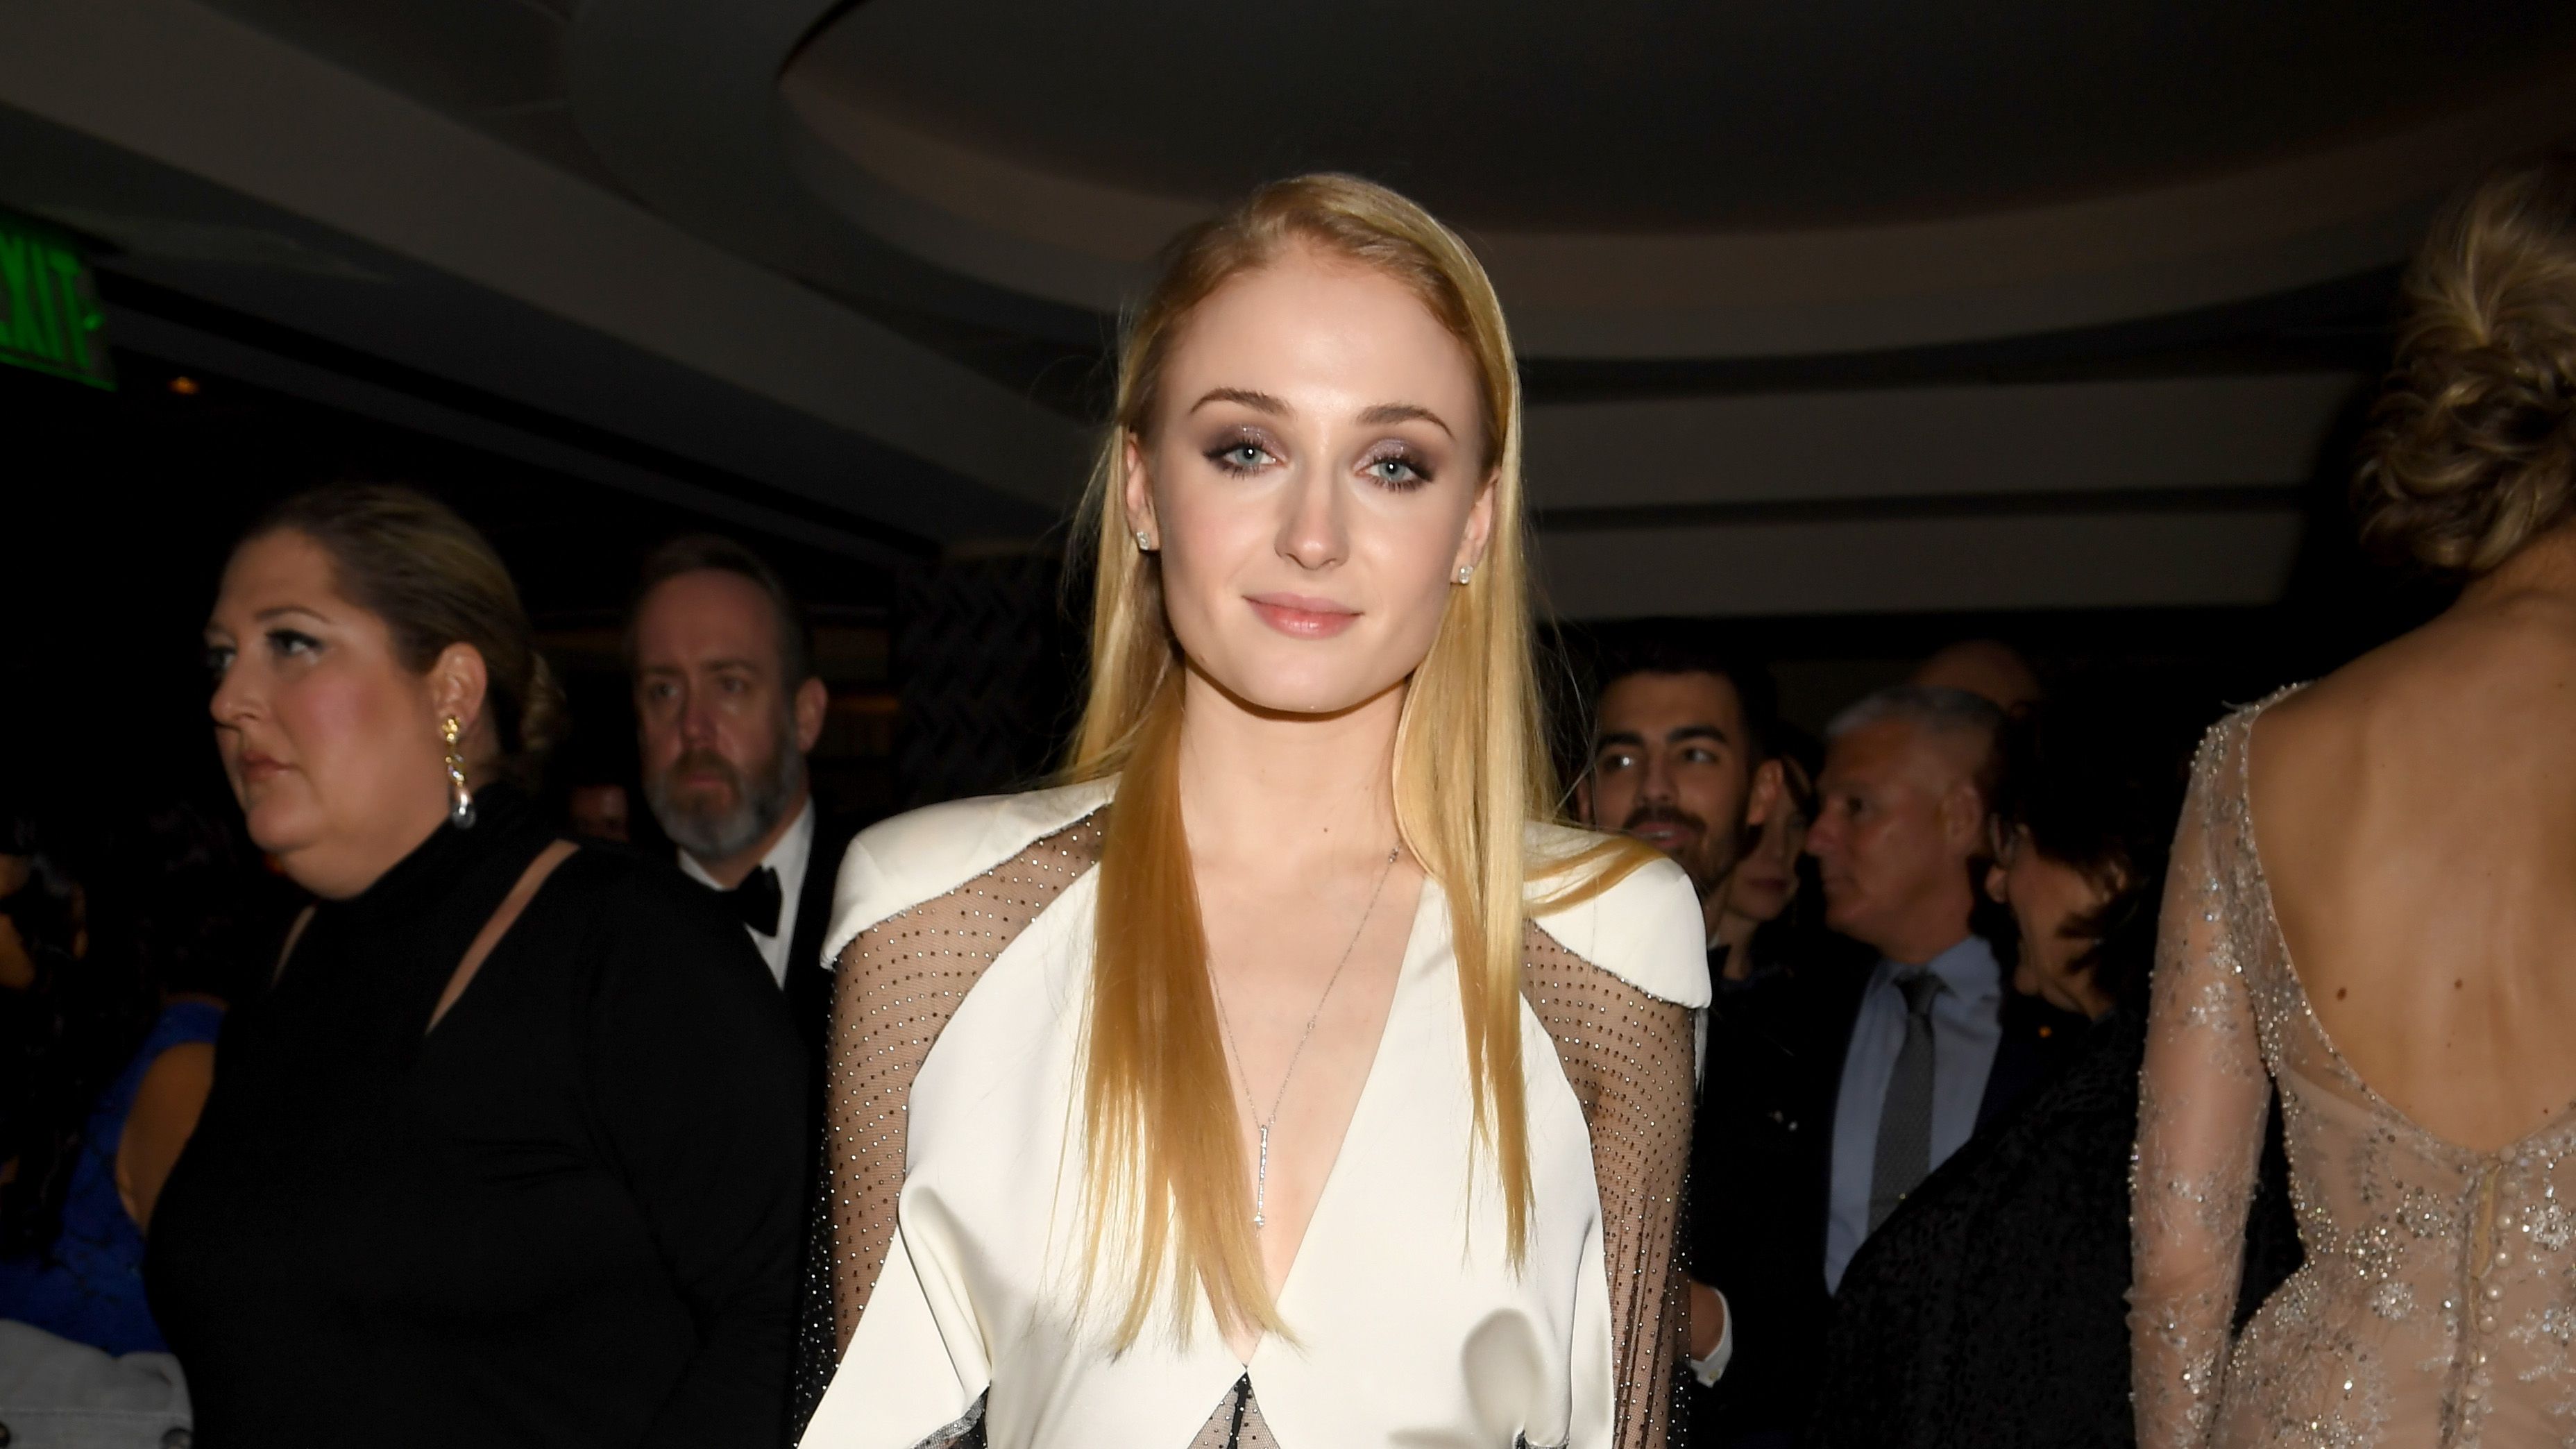 Is This The Start Of Sophie Turner's French-Girl Phase?